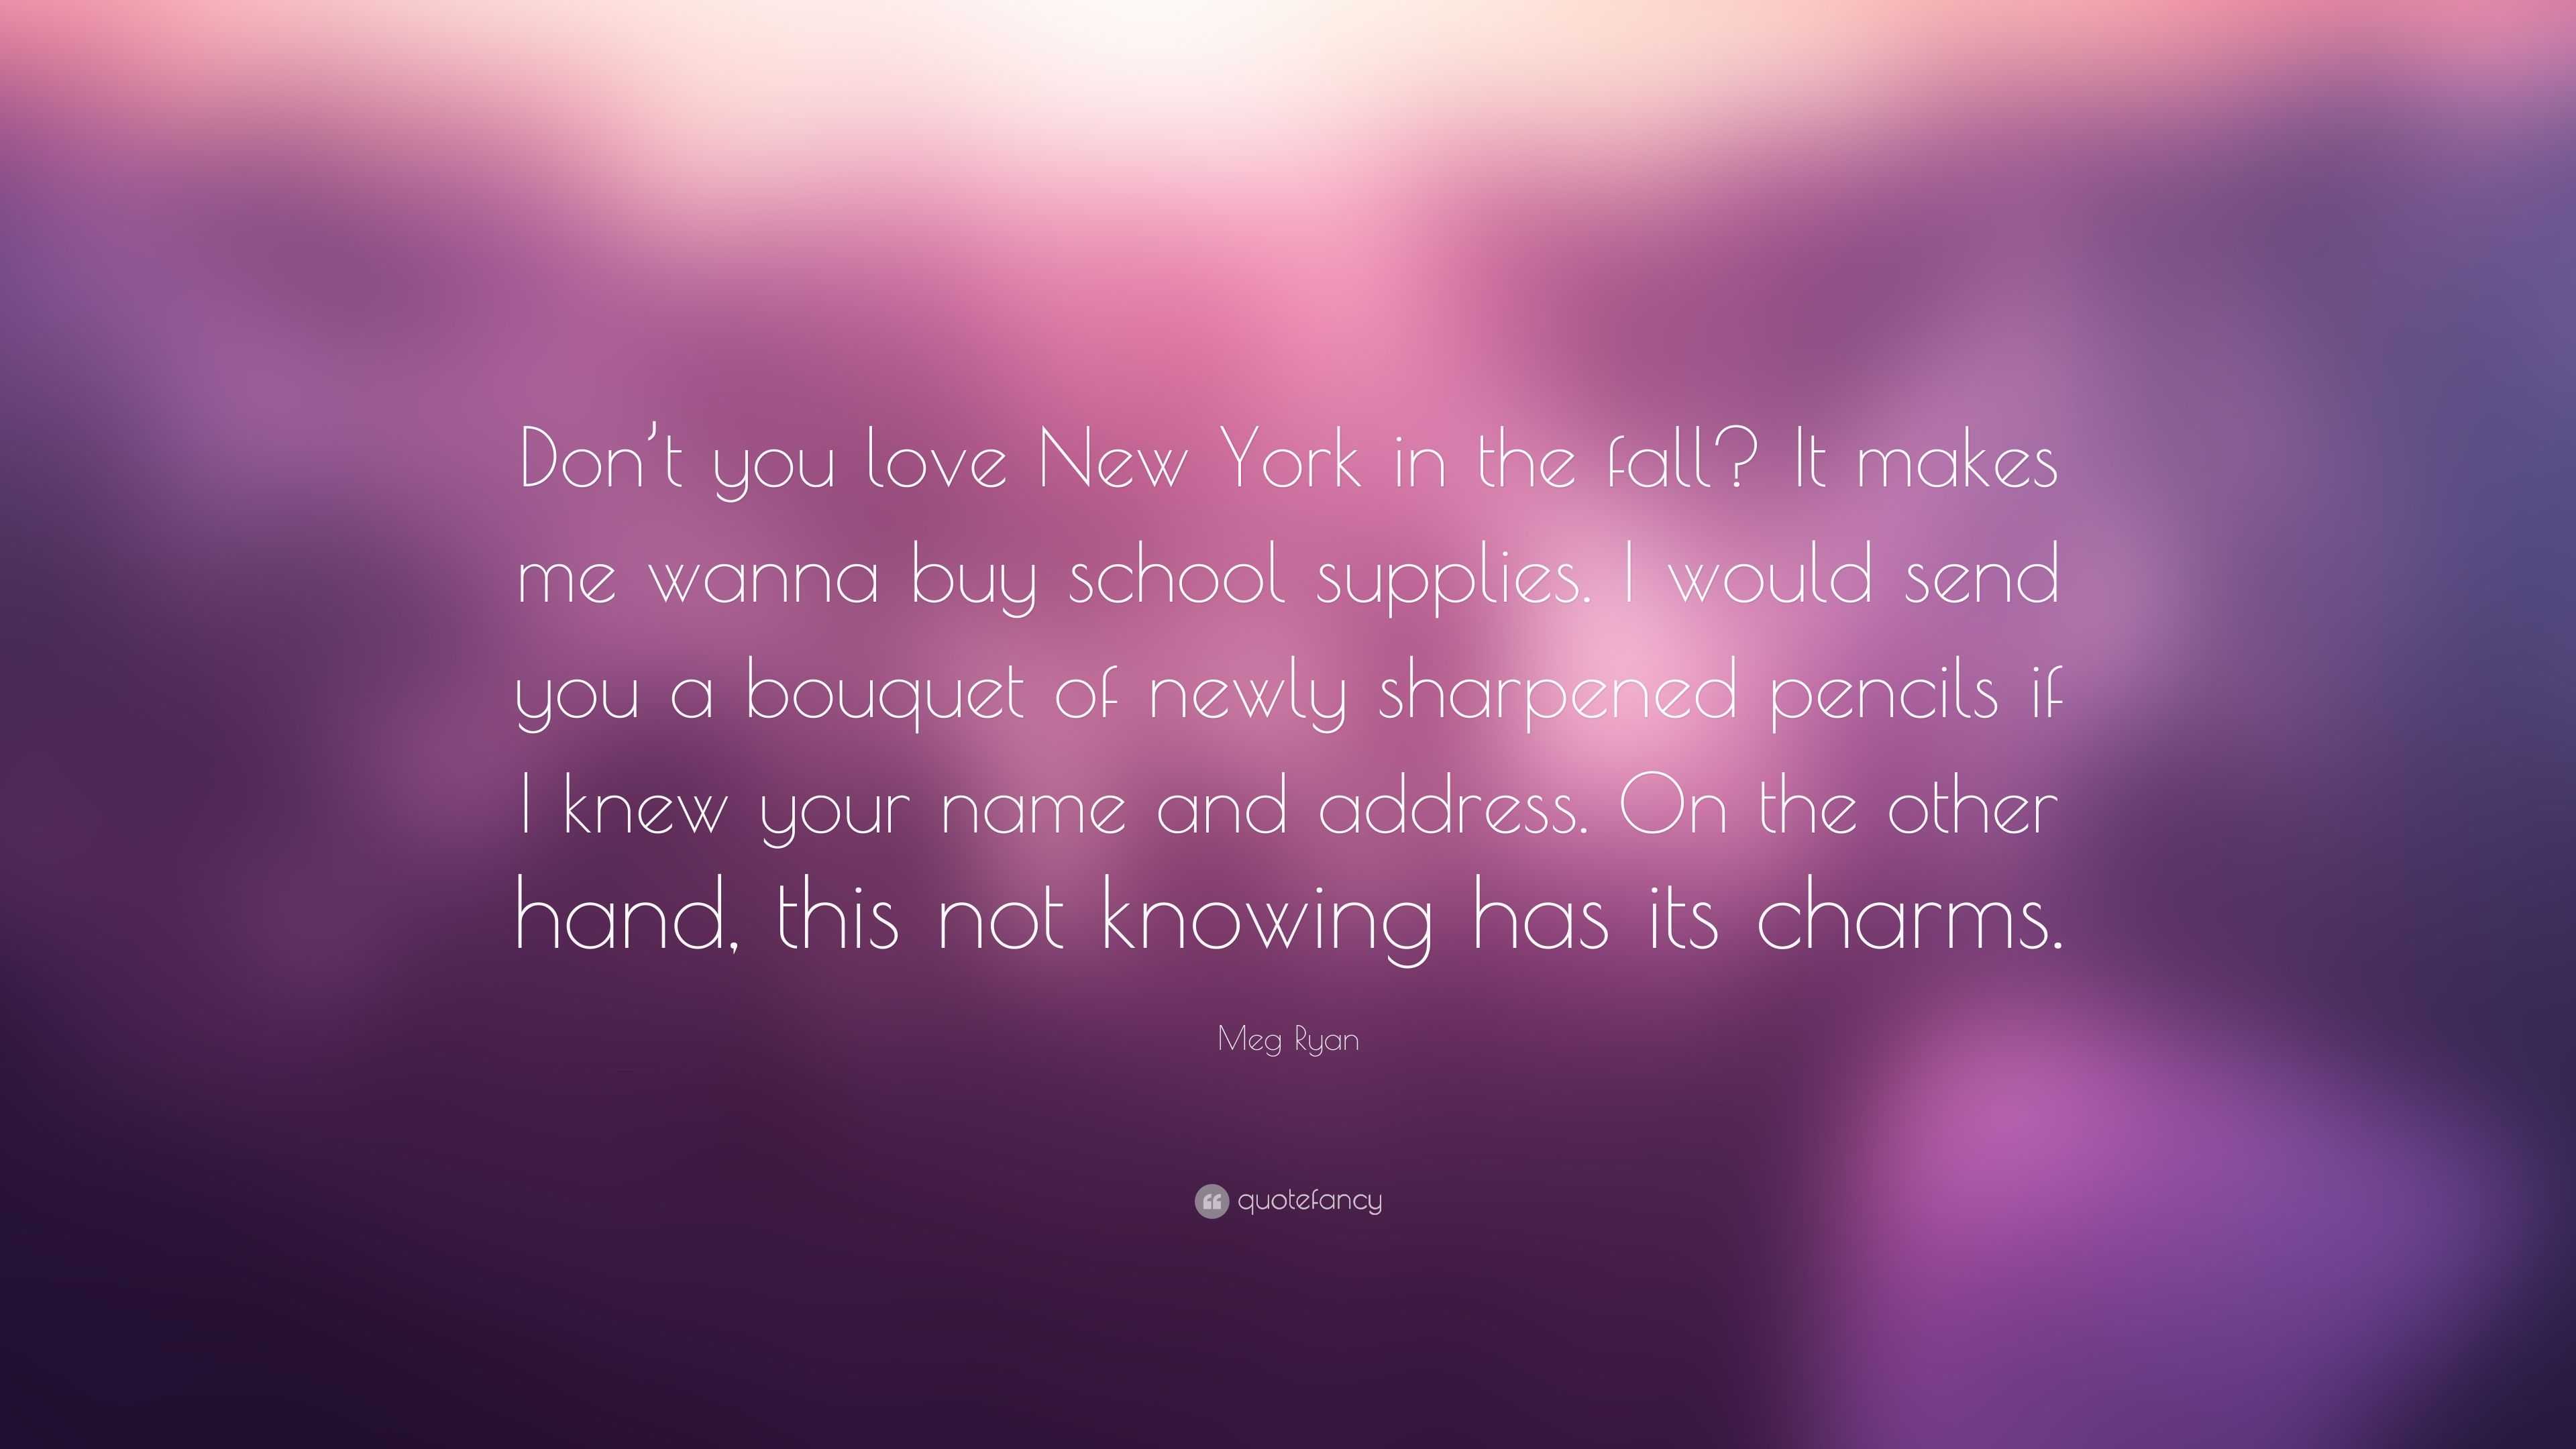 Meg Ryan Quote “Don t you love New York in the fall